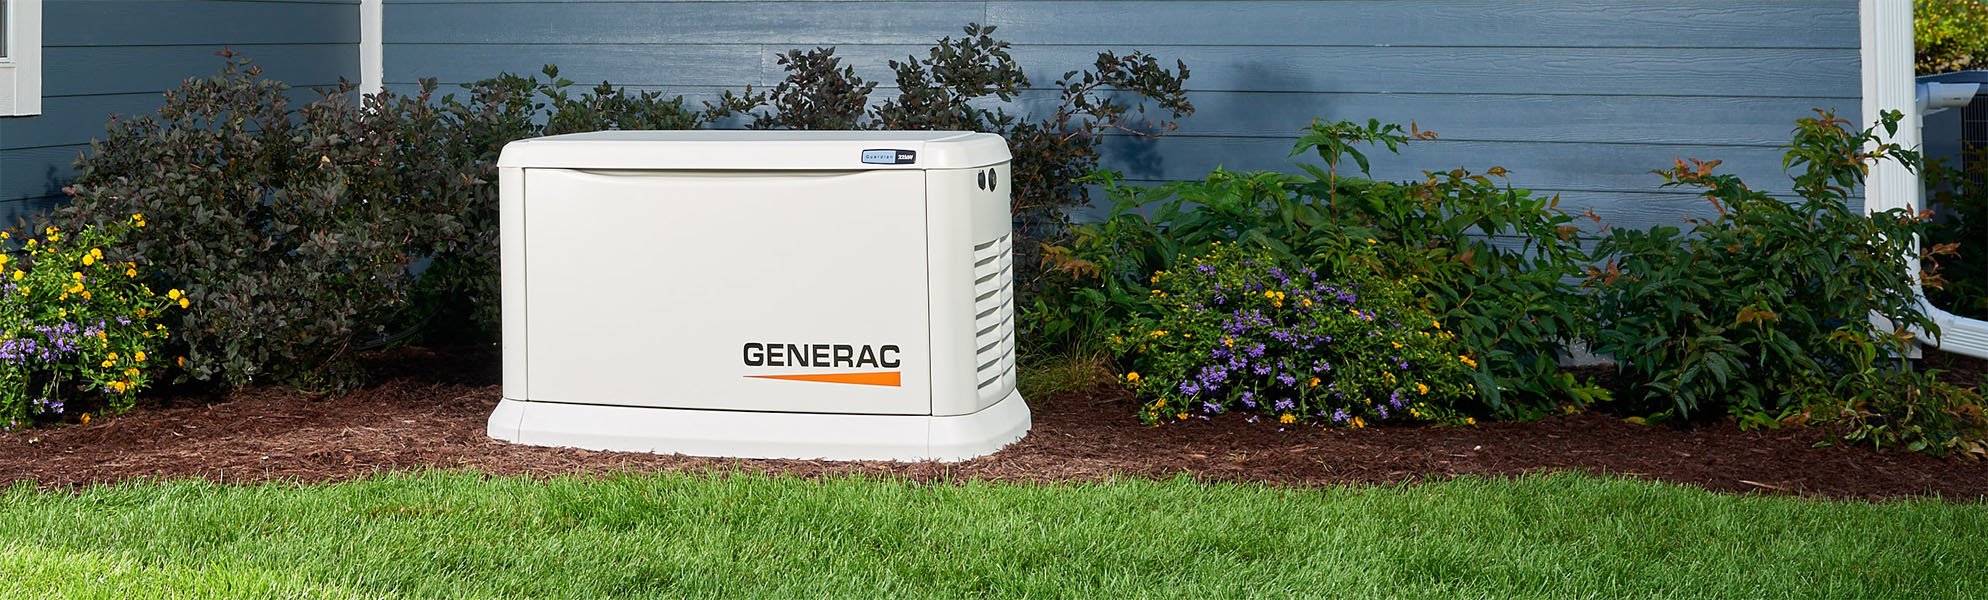 Generac Home Standby Generator in a garden outside a home.